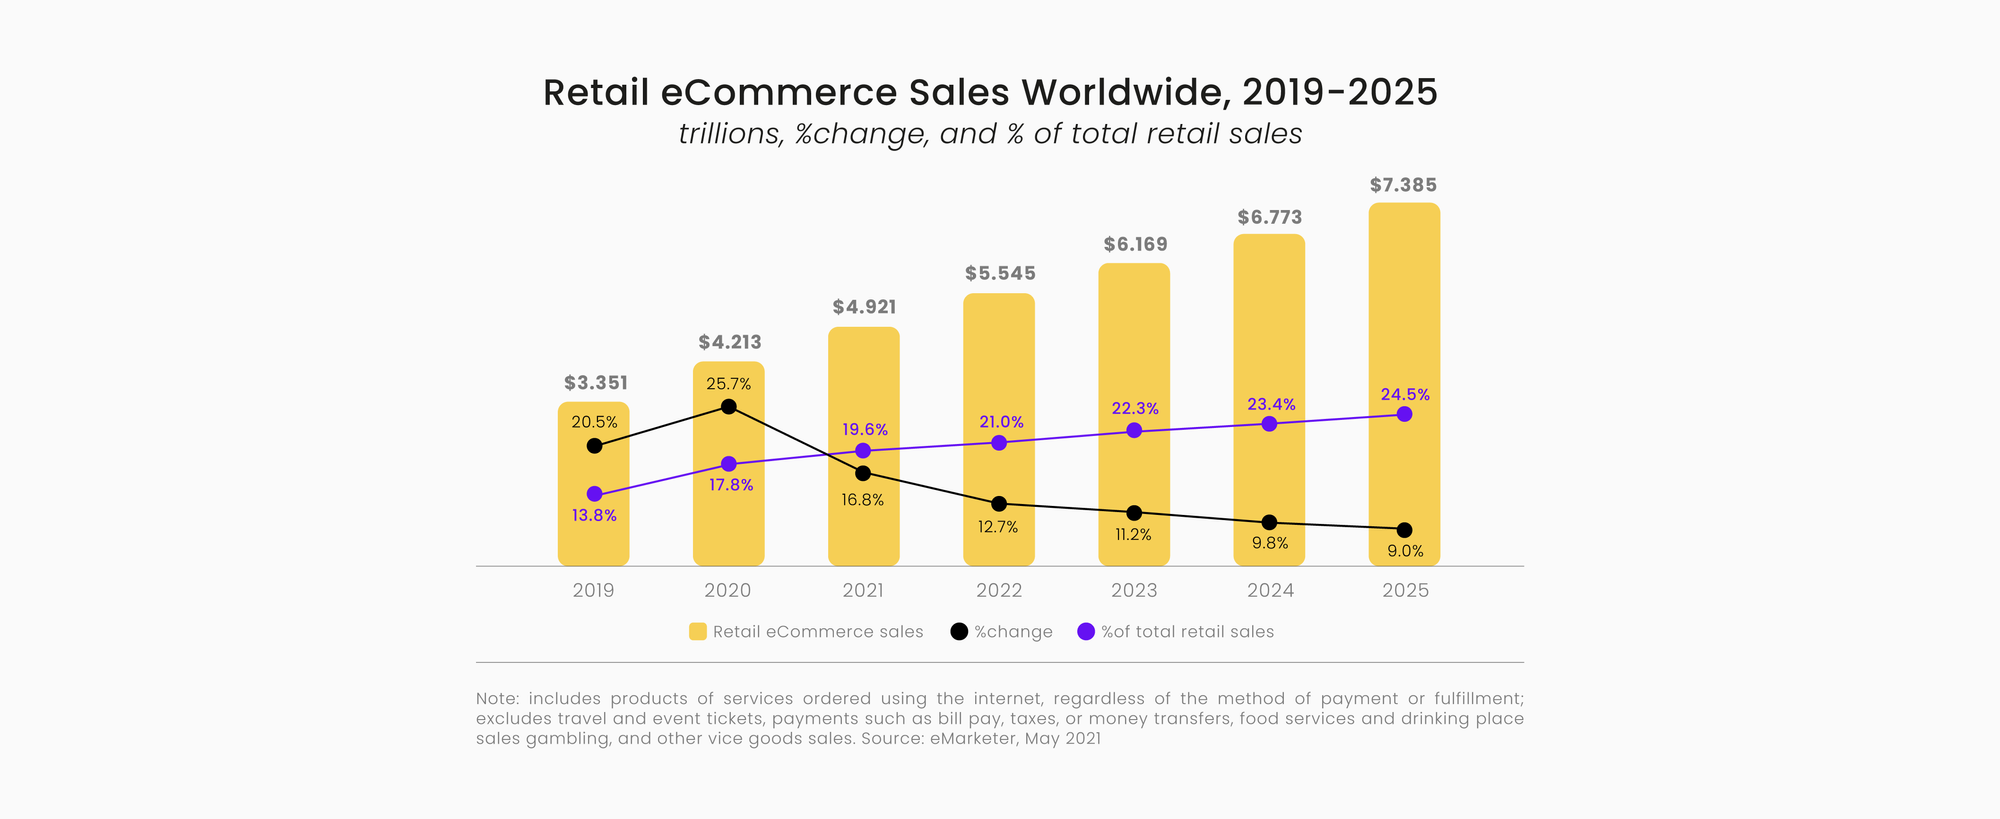 The Impact of MT on the Global eCommerce Opportunity